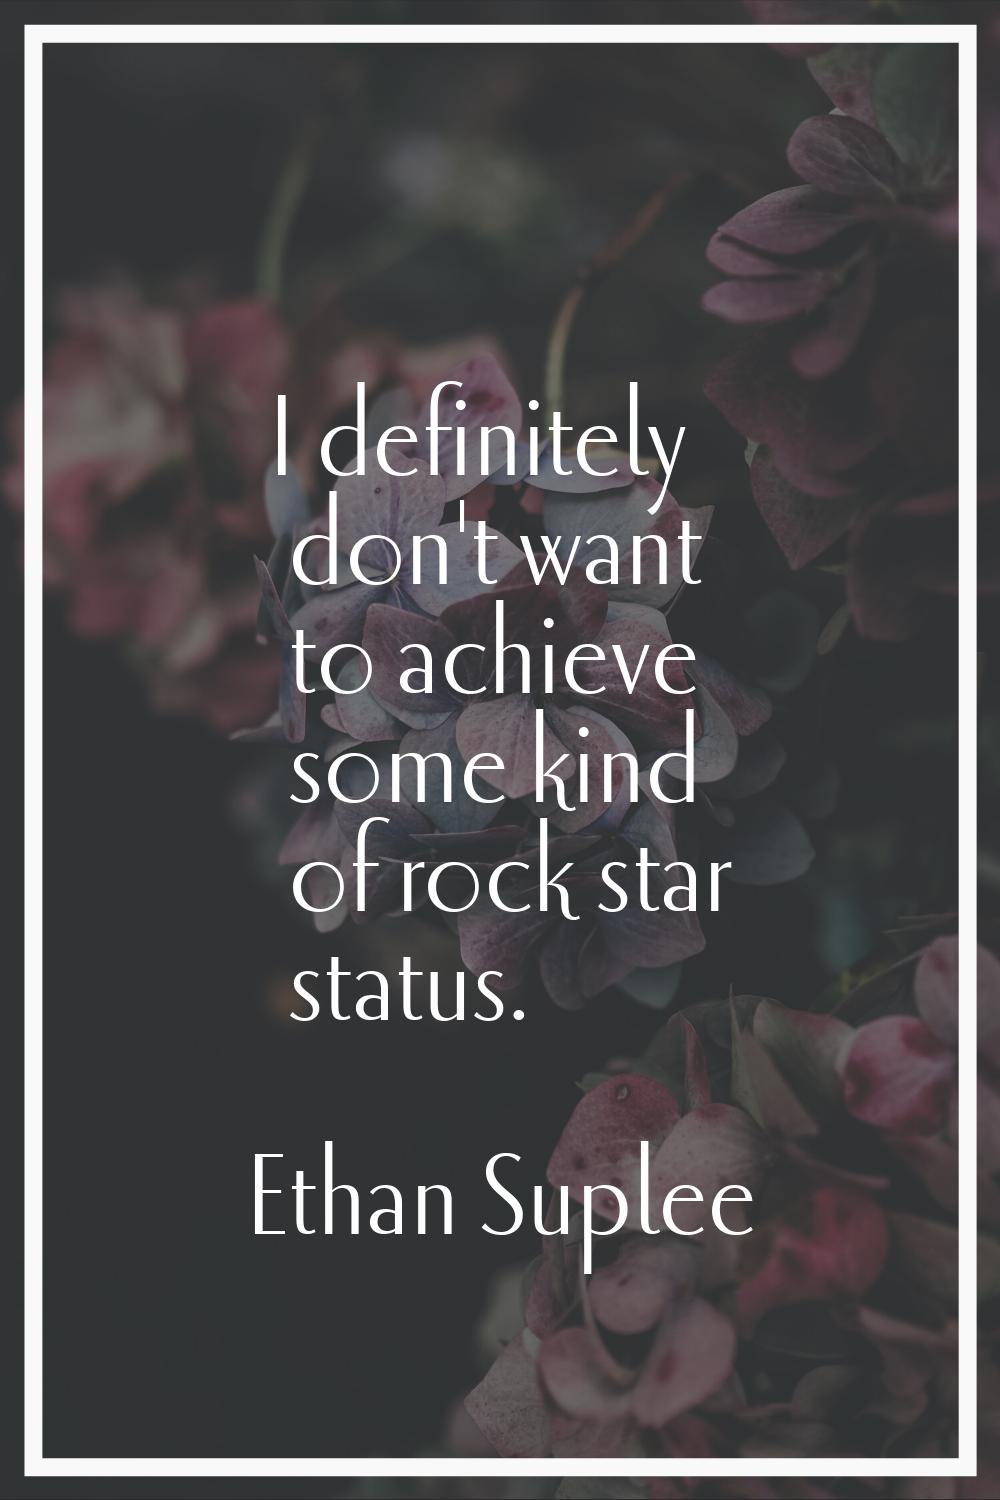 I definitely don't want to achieve some kind of rock star status.